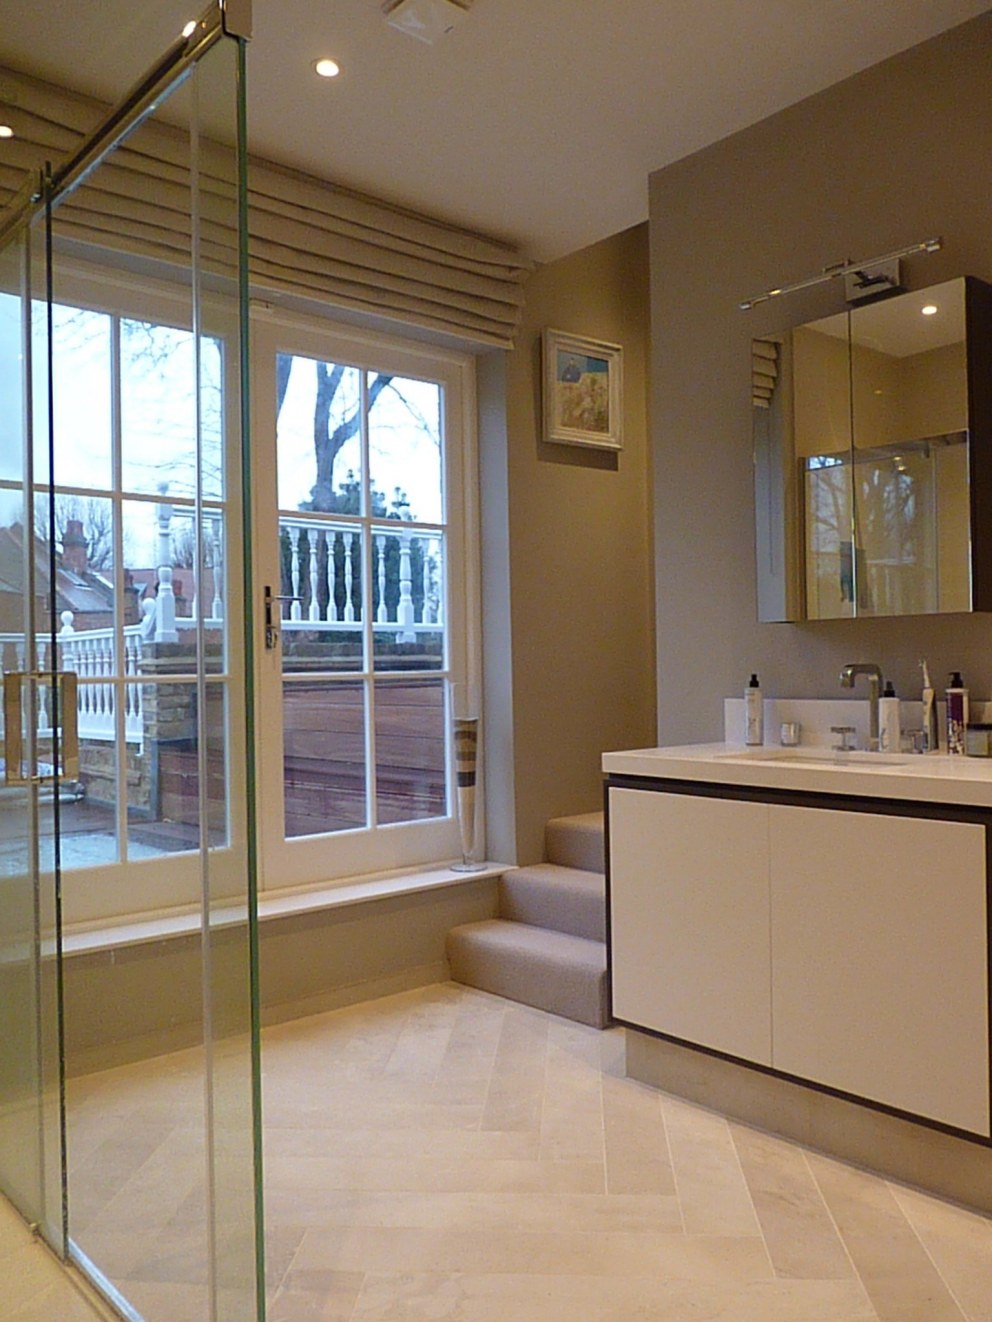 Victorian House renovation in Chiswick, West London | Master Ensuite Bathroom | Interior Designers